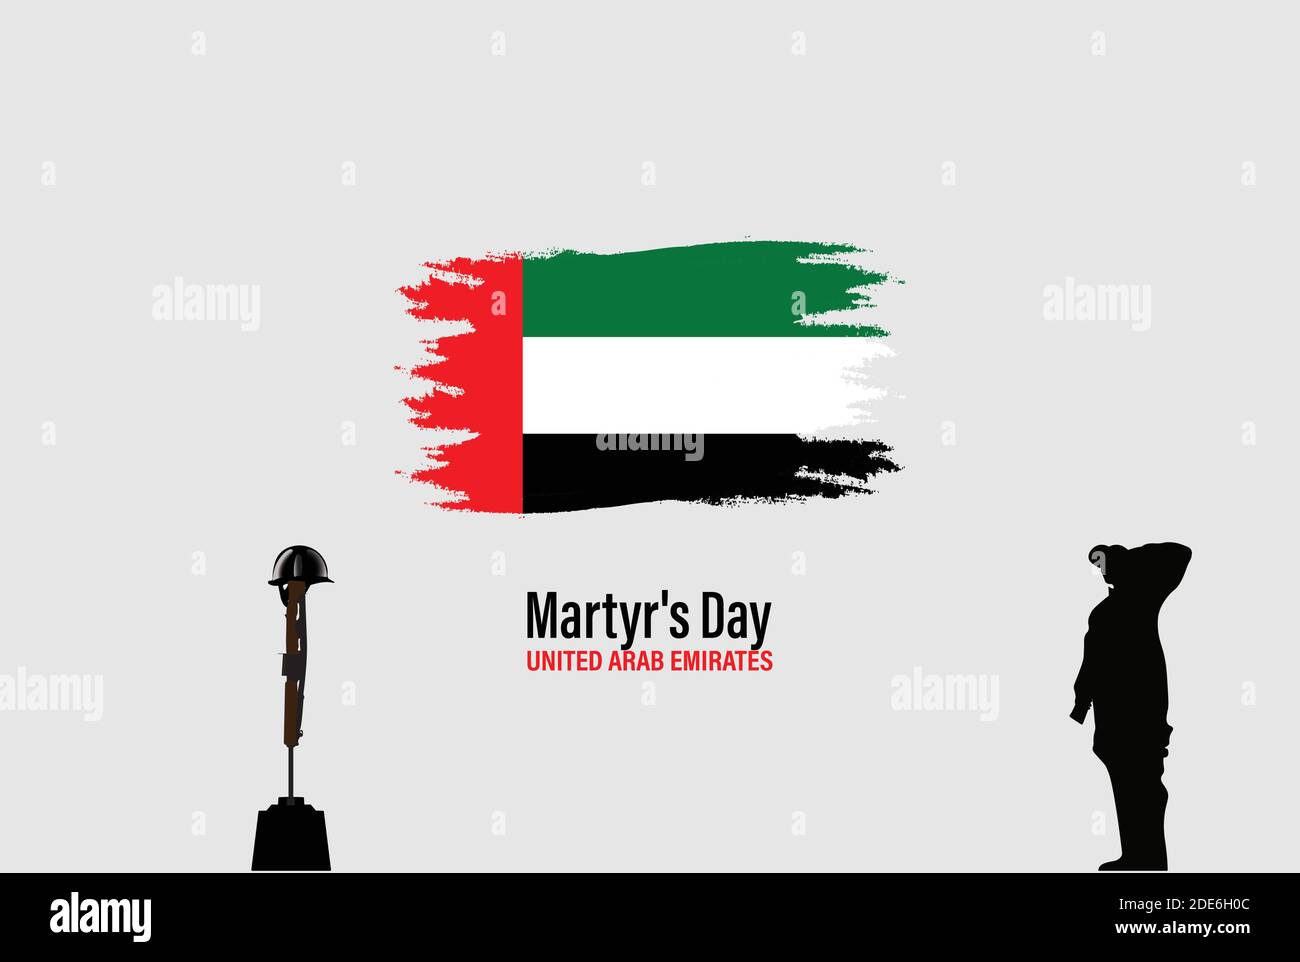 Illustration of uae commemoration day. United Arab Emirates Martyr's Day. Design for card, posters. Stock Vector